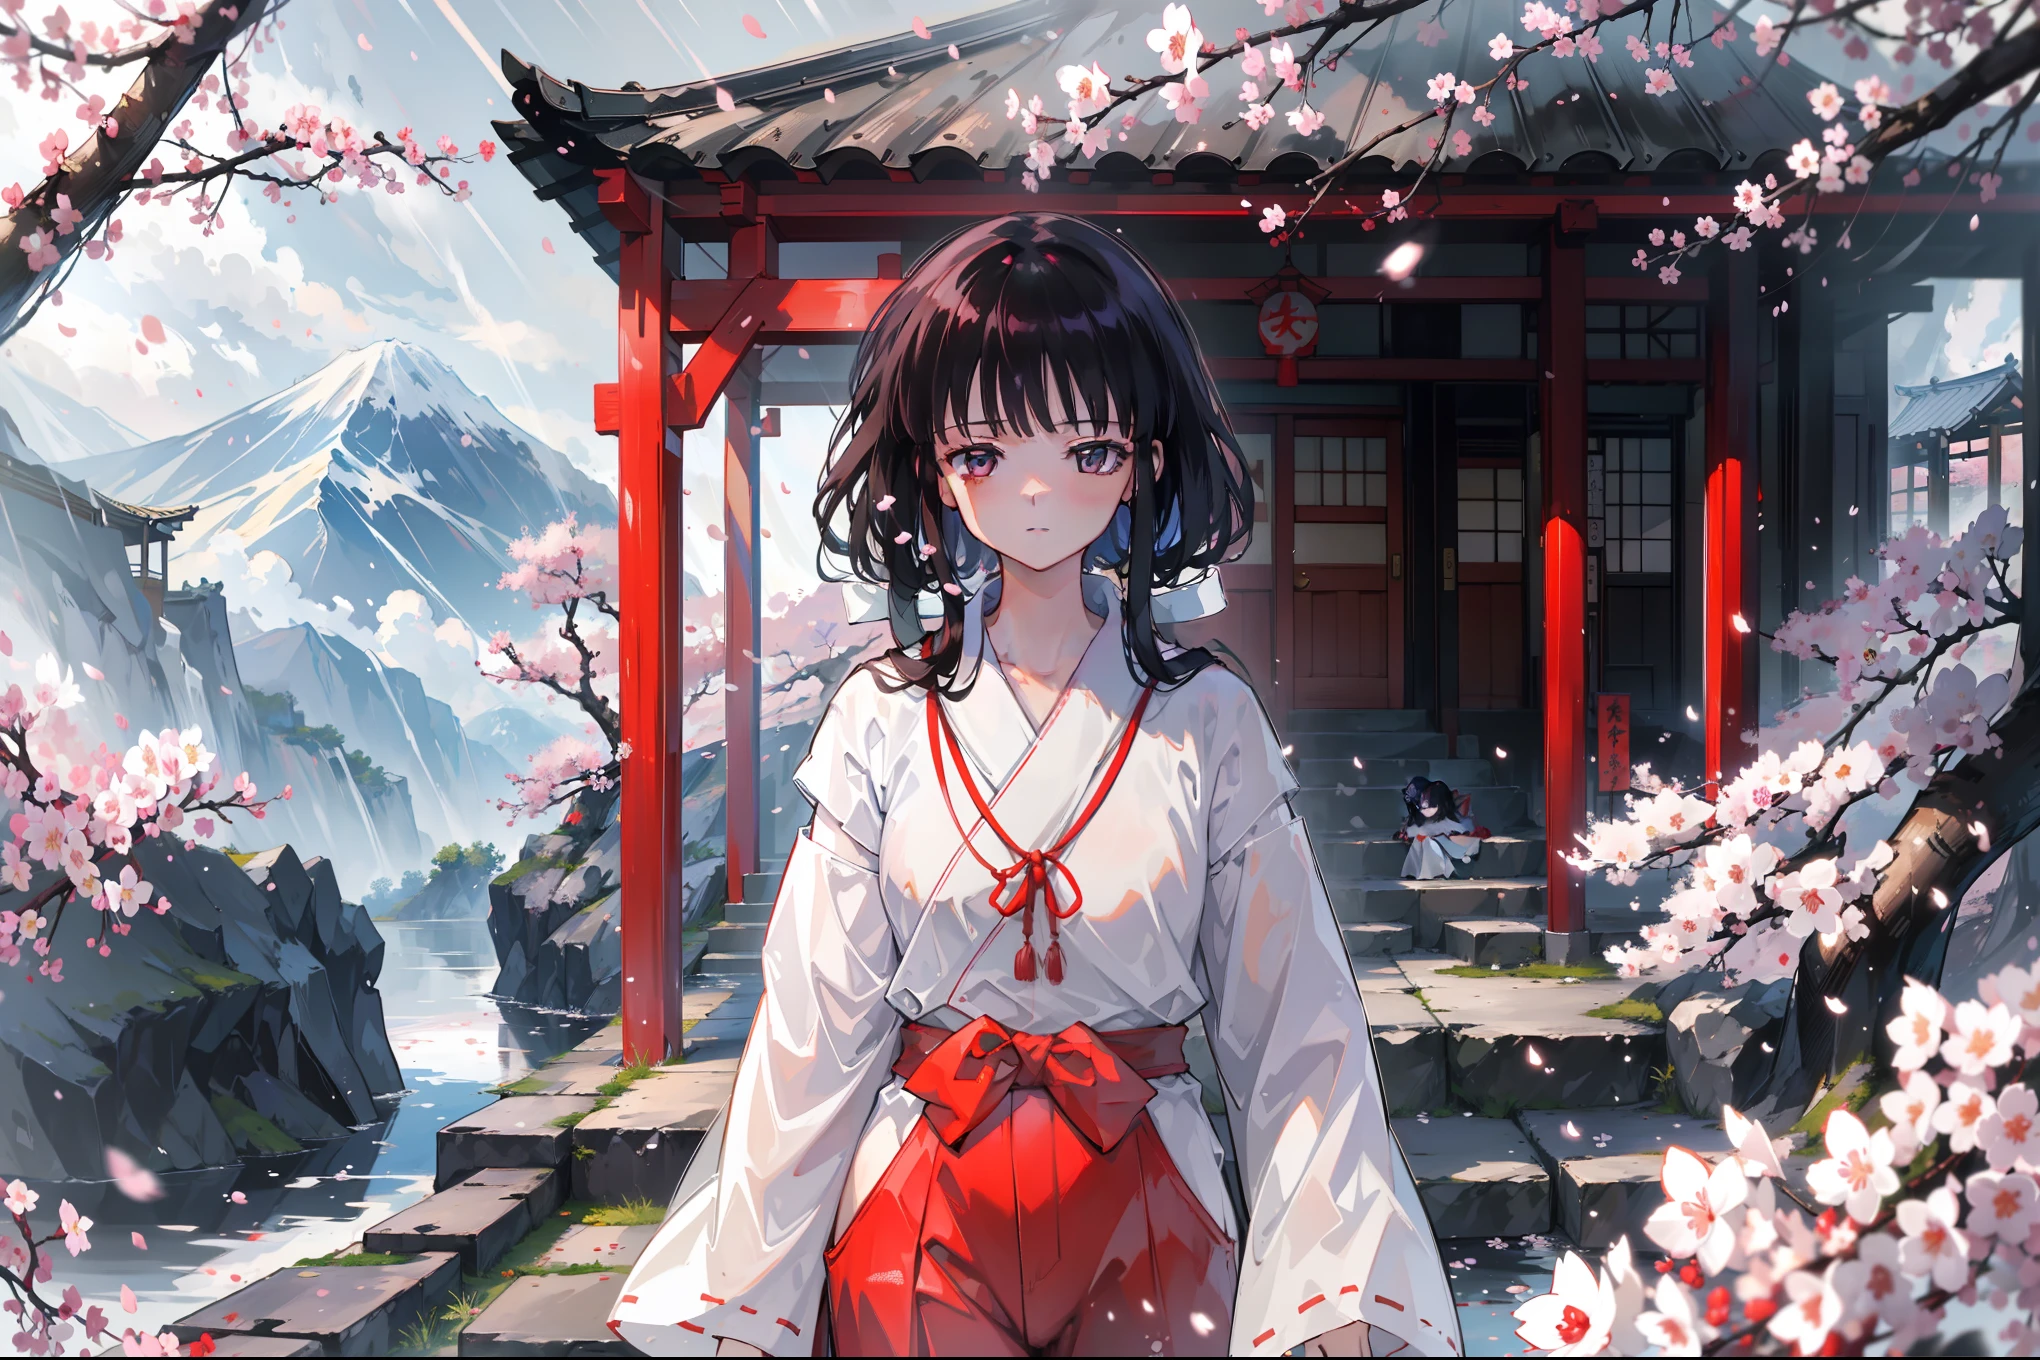 (masterpiece), best quality, have expressed, is a perfect face, 1 girl, (独奏), Platycodon, skinny, side lock, blunt_hair, Red miko dress, elegant,Japanese traditional clothing,imagine,alone, temple, japanese architecture，best quality，masterpiece，extremely，Eye focus beautiful eyes, anime characters,woman,alone, Standing on the top of the mountain，cloud, Mountain, rain, (Cherry blossoms:1.3), day, high resolution, looking at the audience, (32k wallpapers)